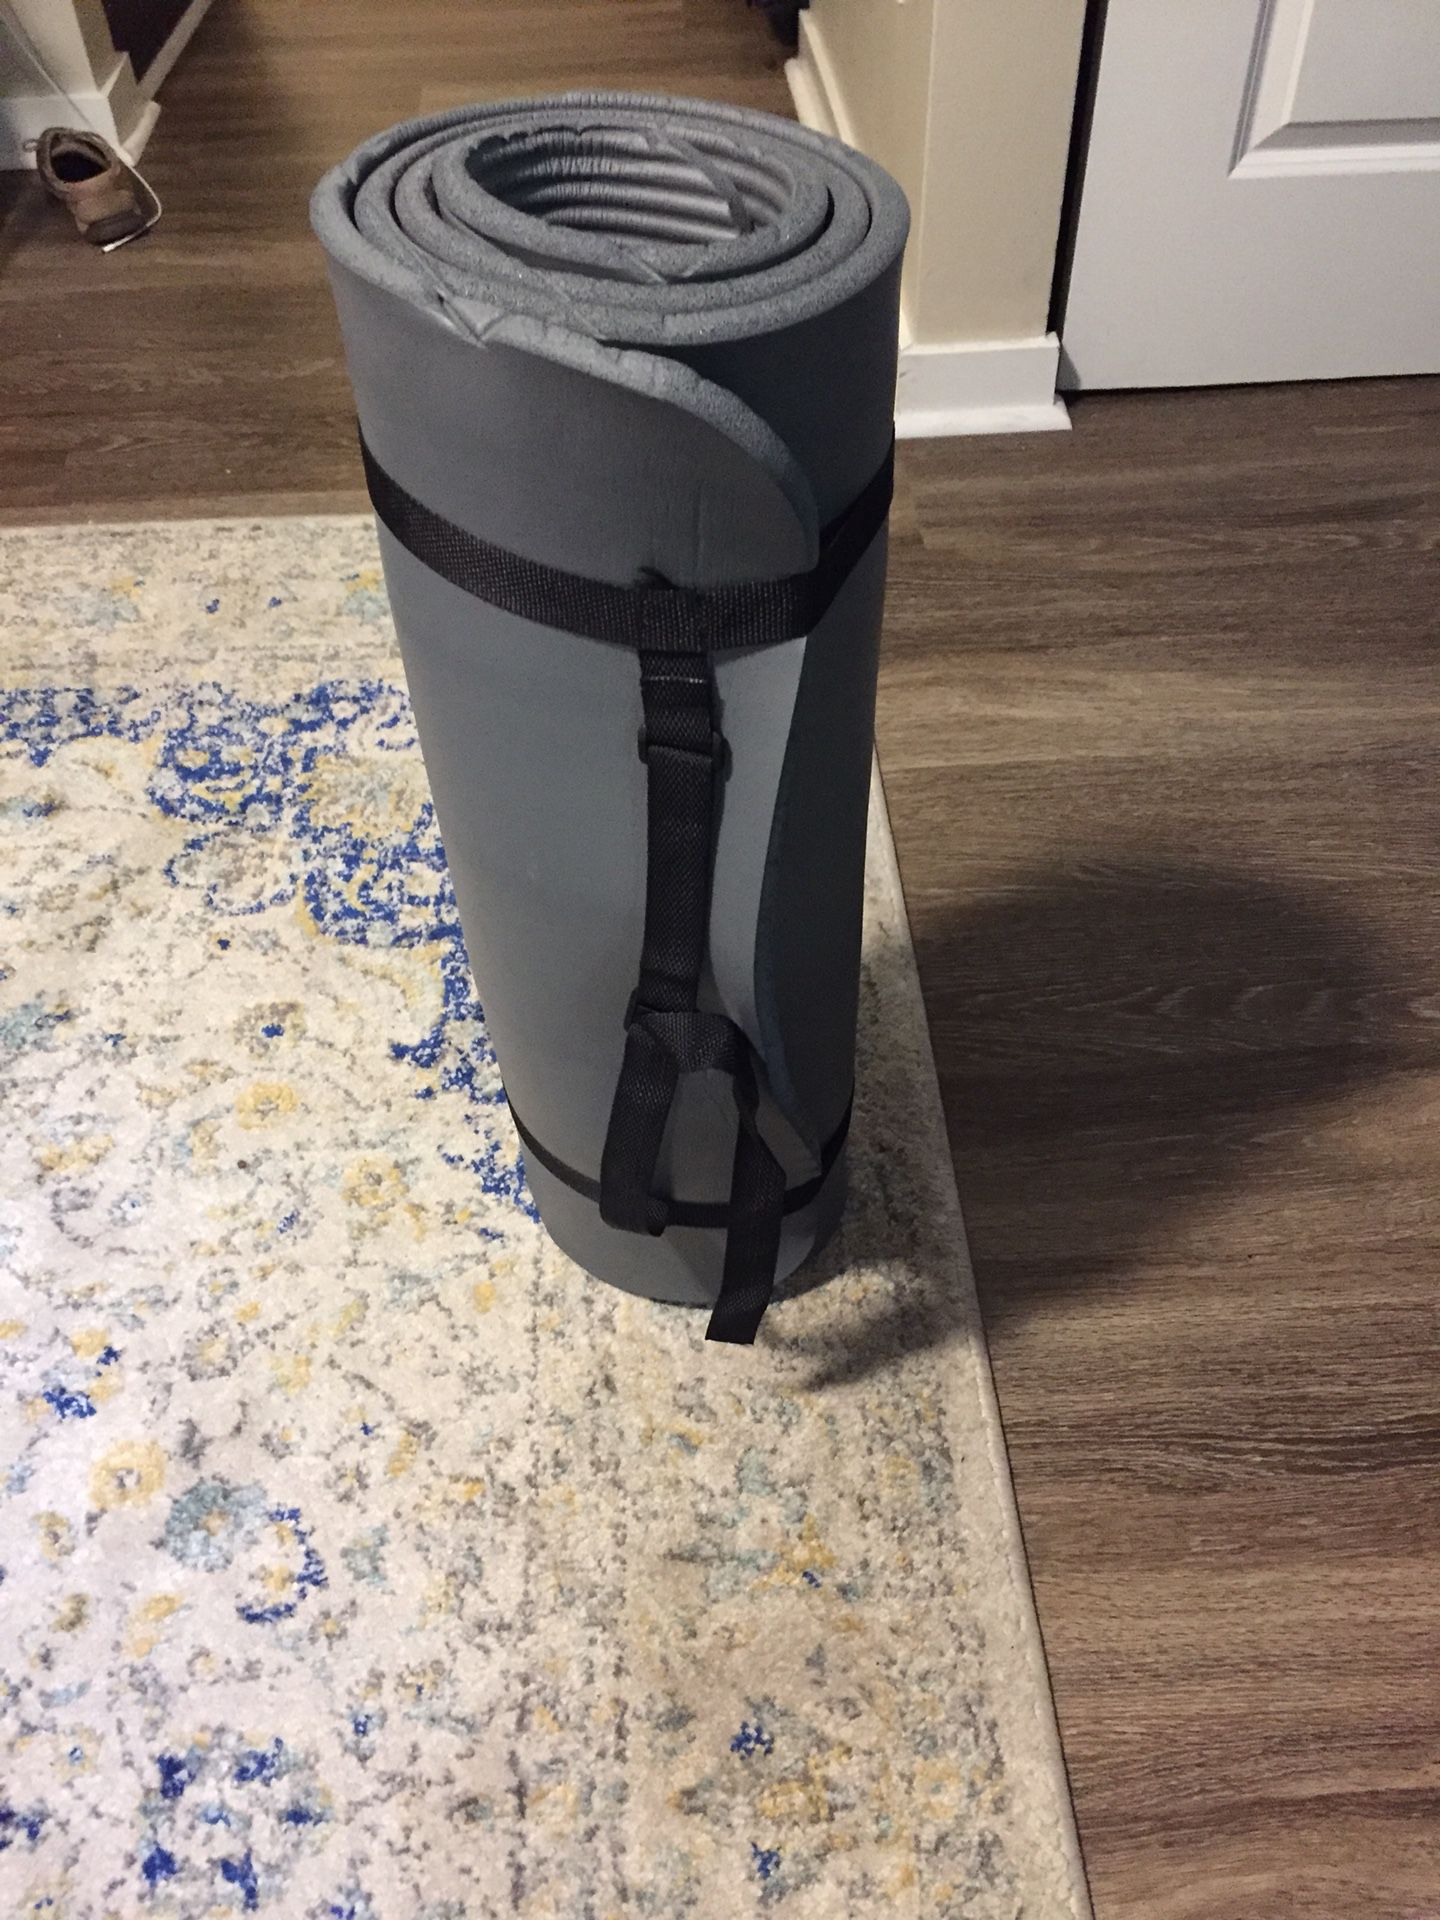 Brand new Pilates/yoga mat with carrier